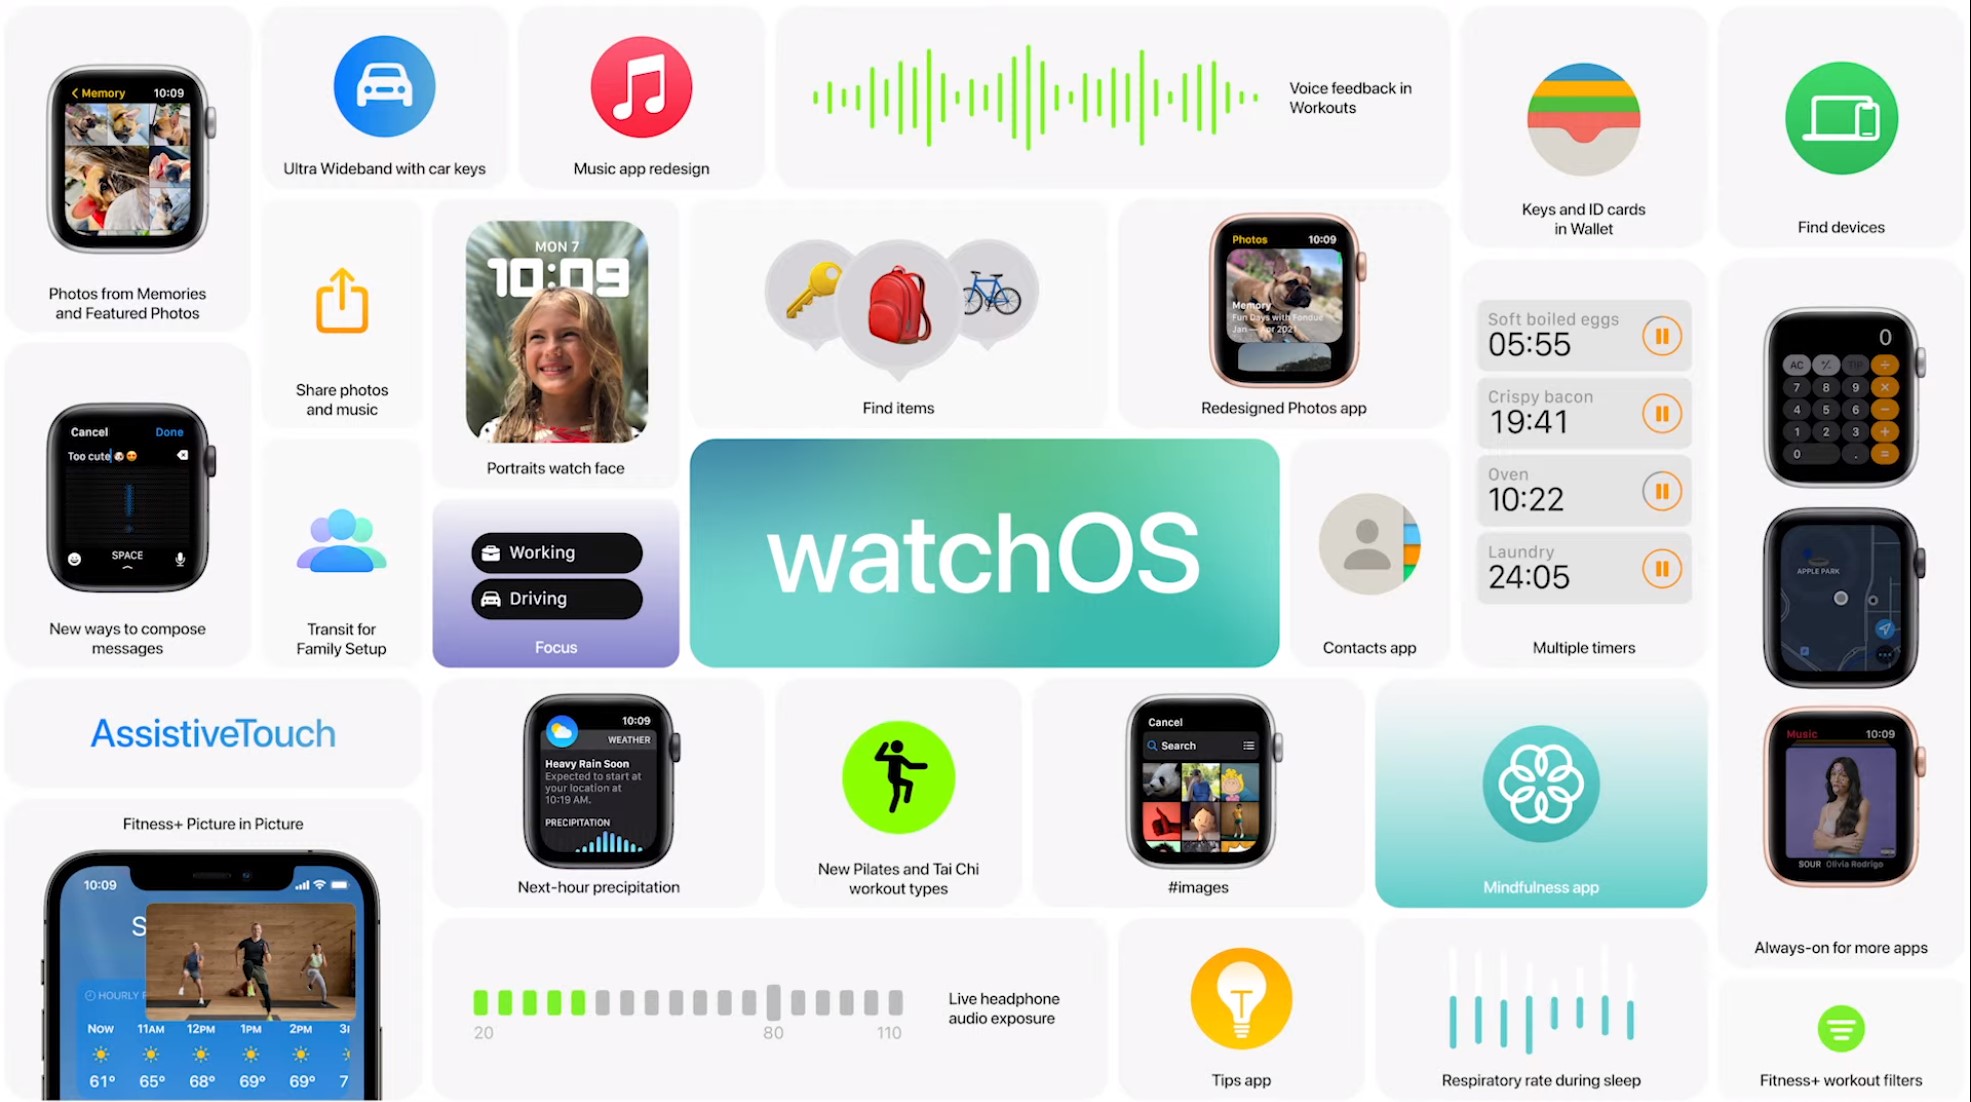 An image showing the new features coming in watchOS 8